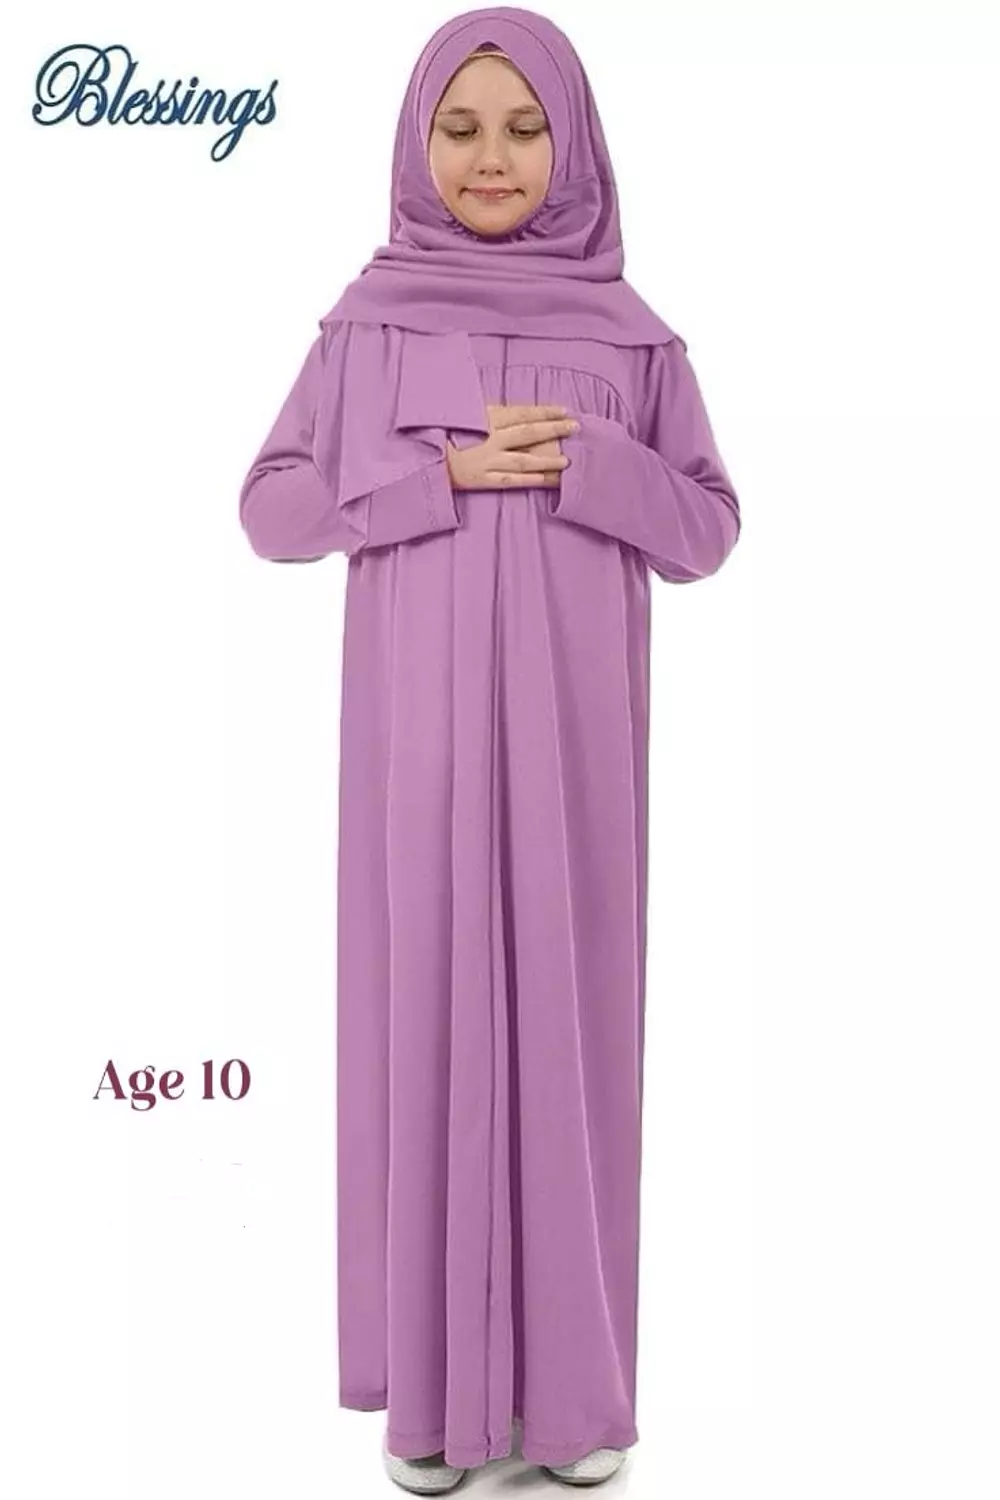 Child Praying Outfit 1-Age 10-Purple hover image